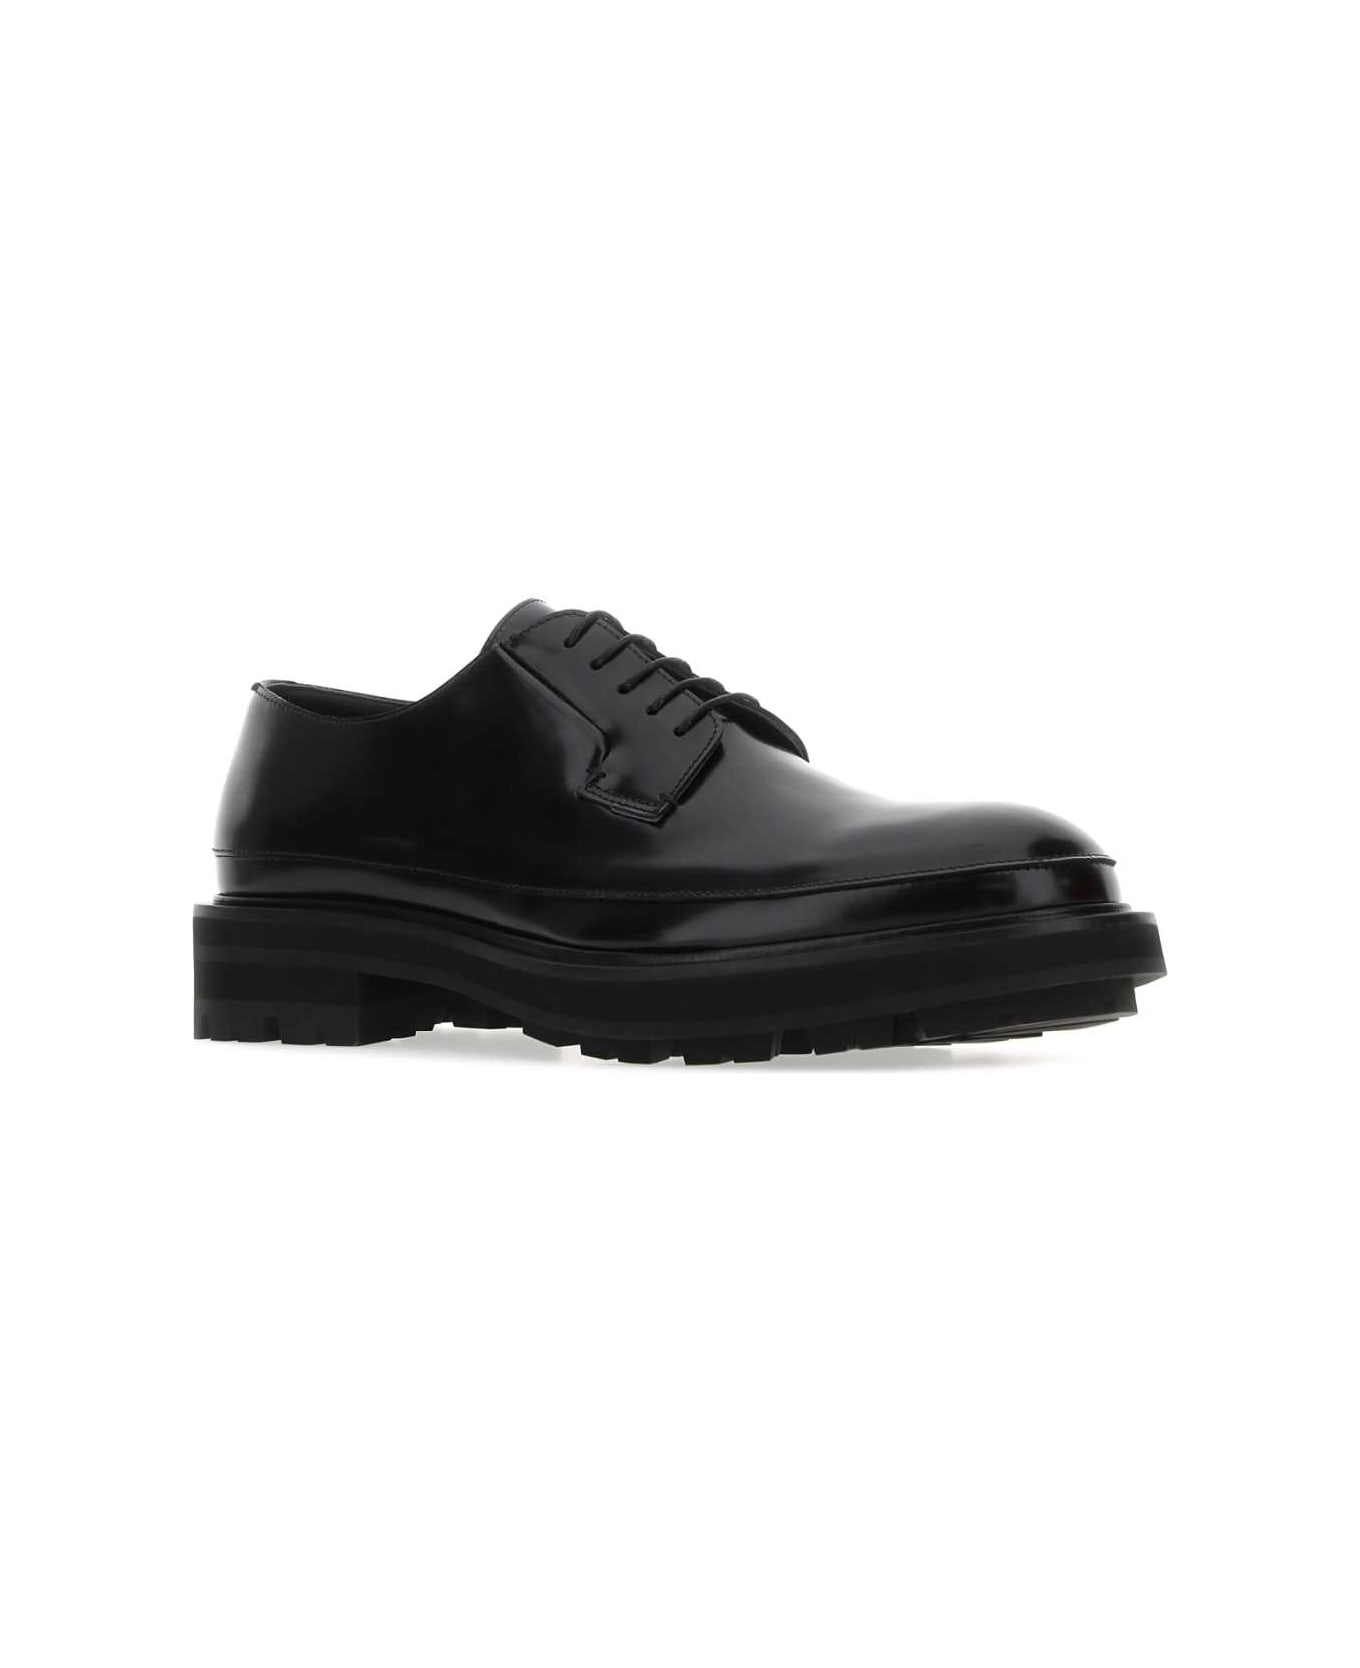 Alexander McQueen Black Leather Lace-up Shoes - 1000